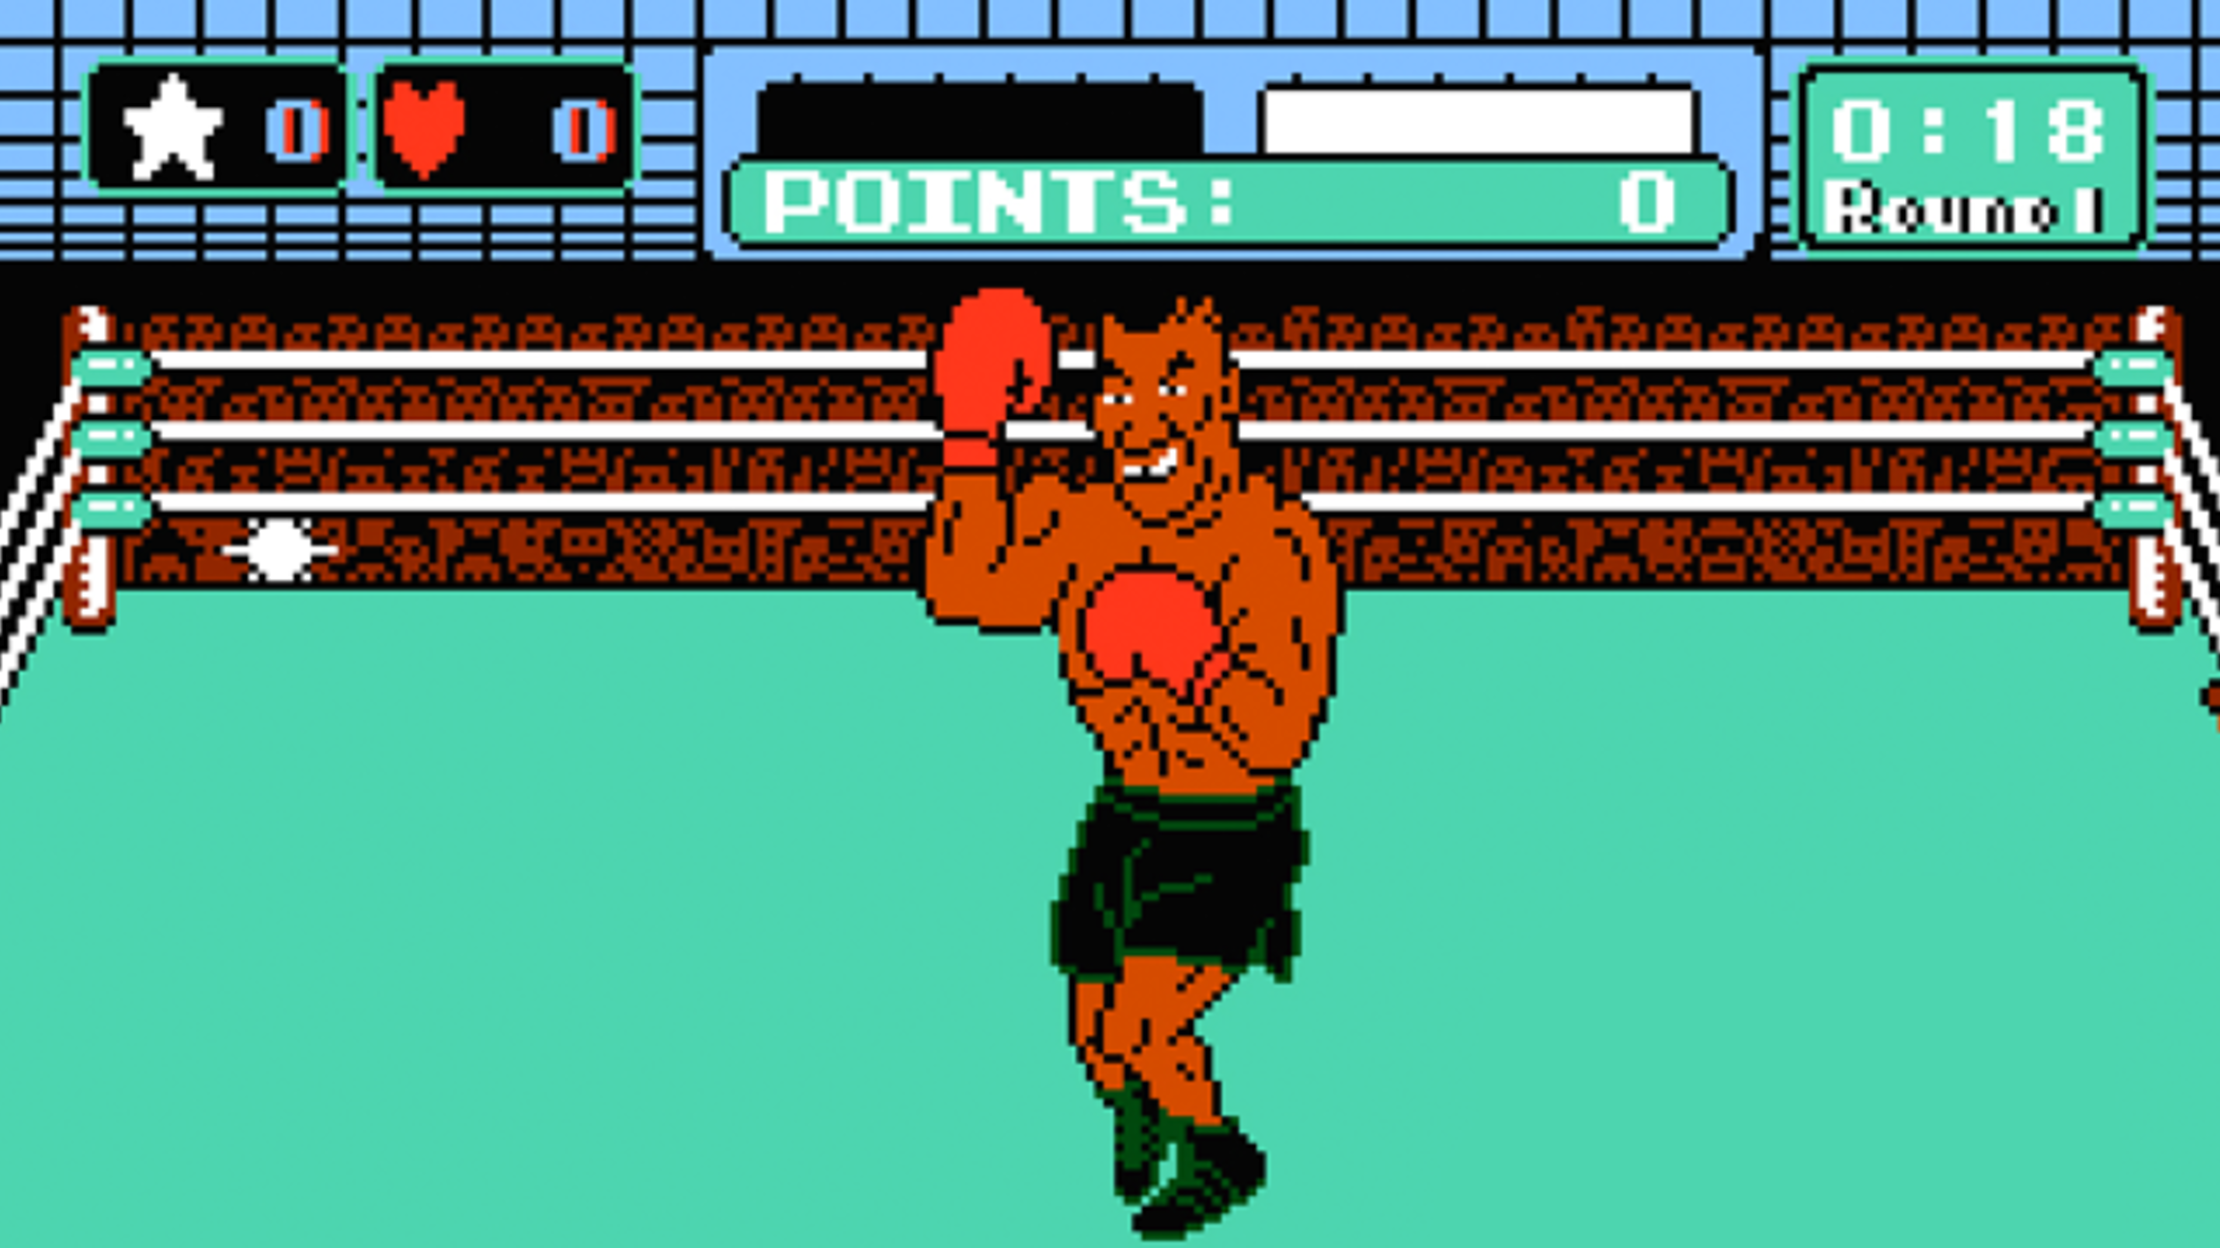 bad moments in great games - Mike Tyson’s Punchout: Mike Tyson Fight